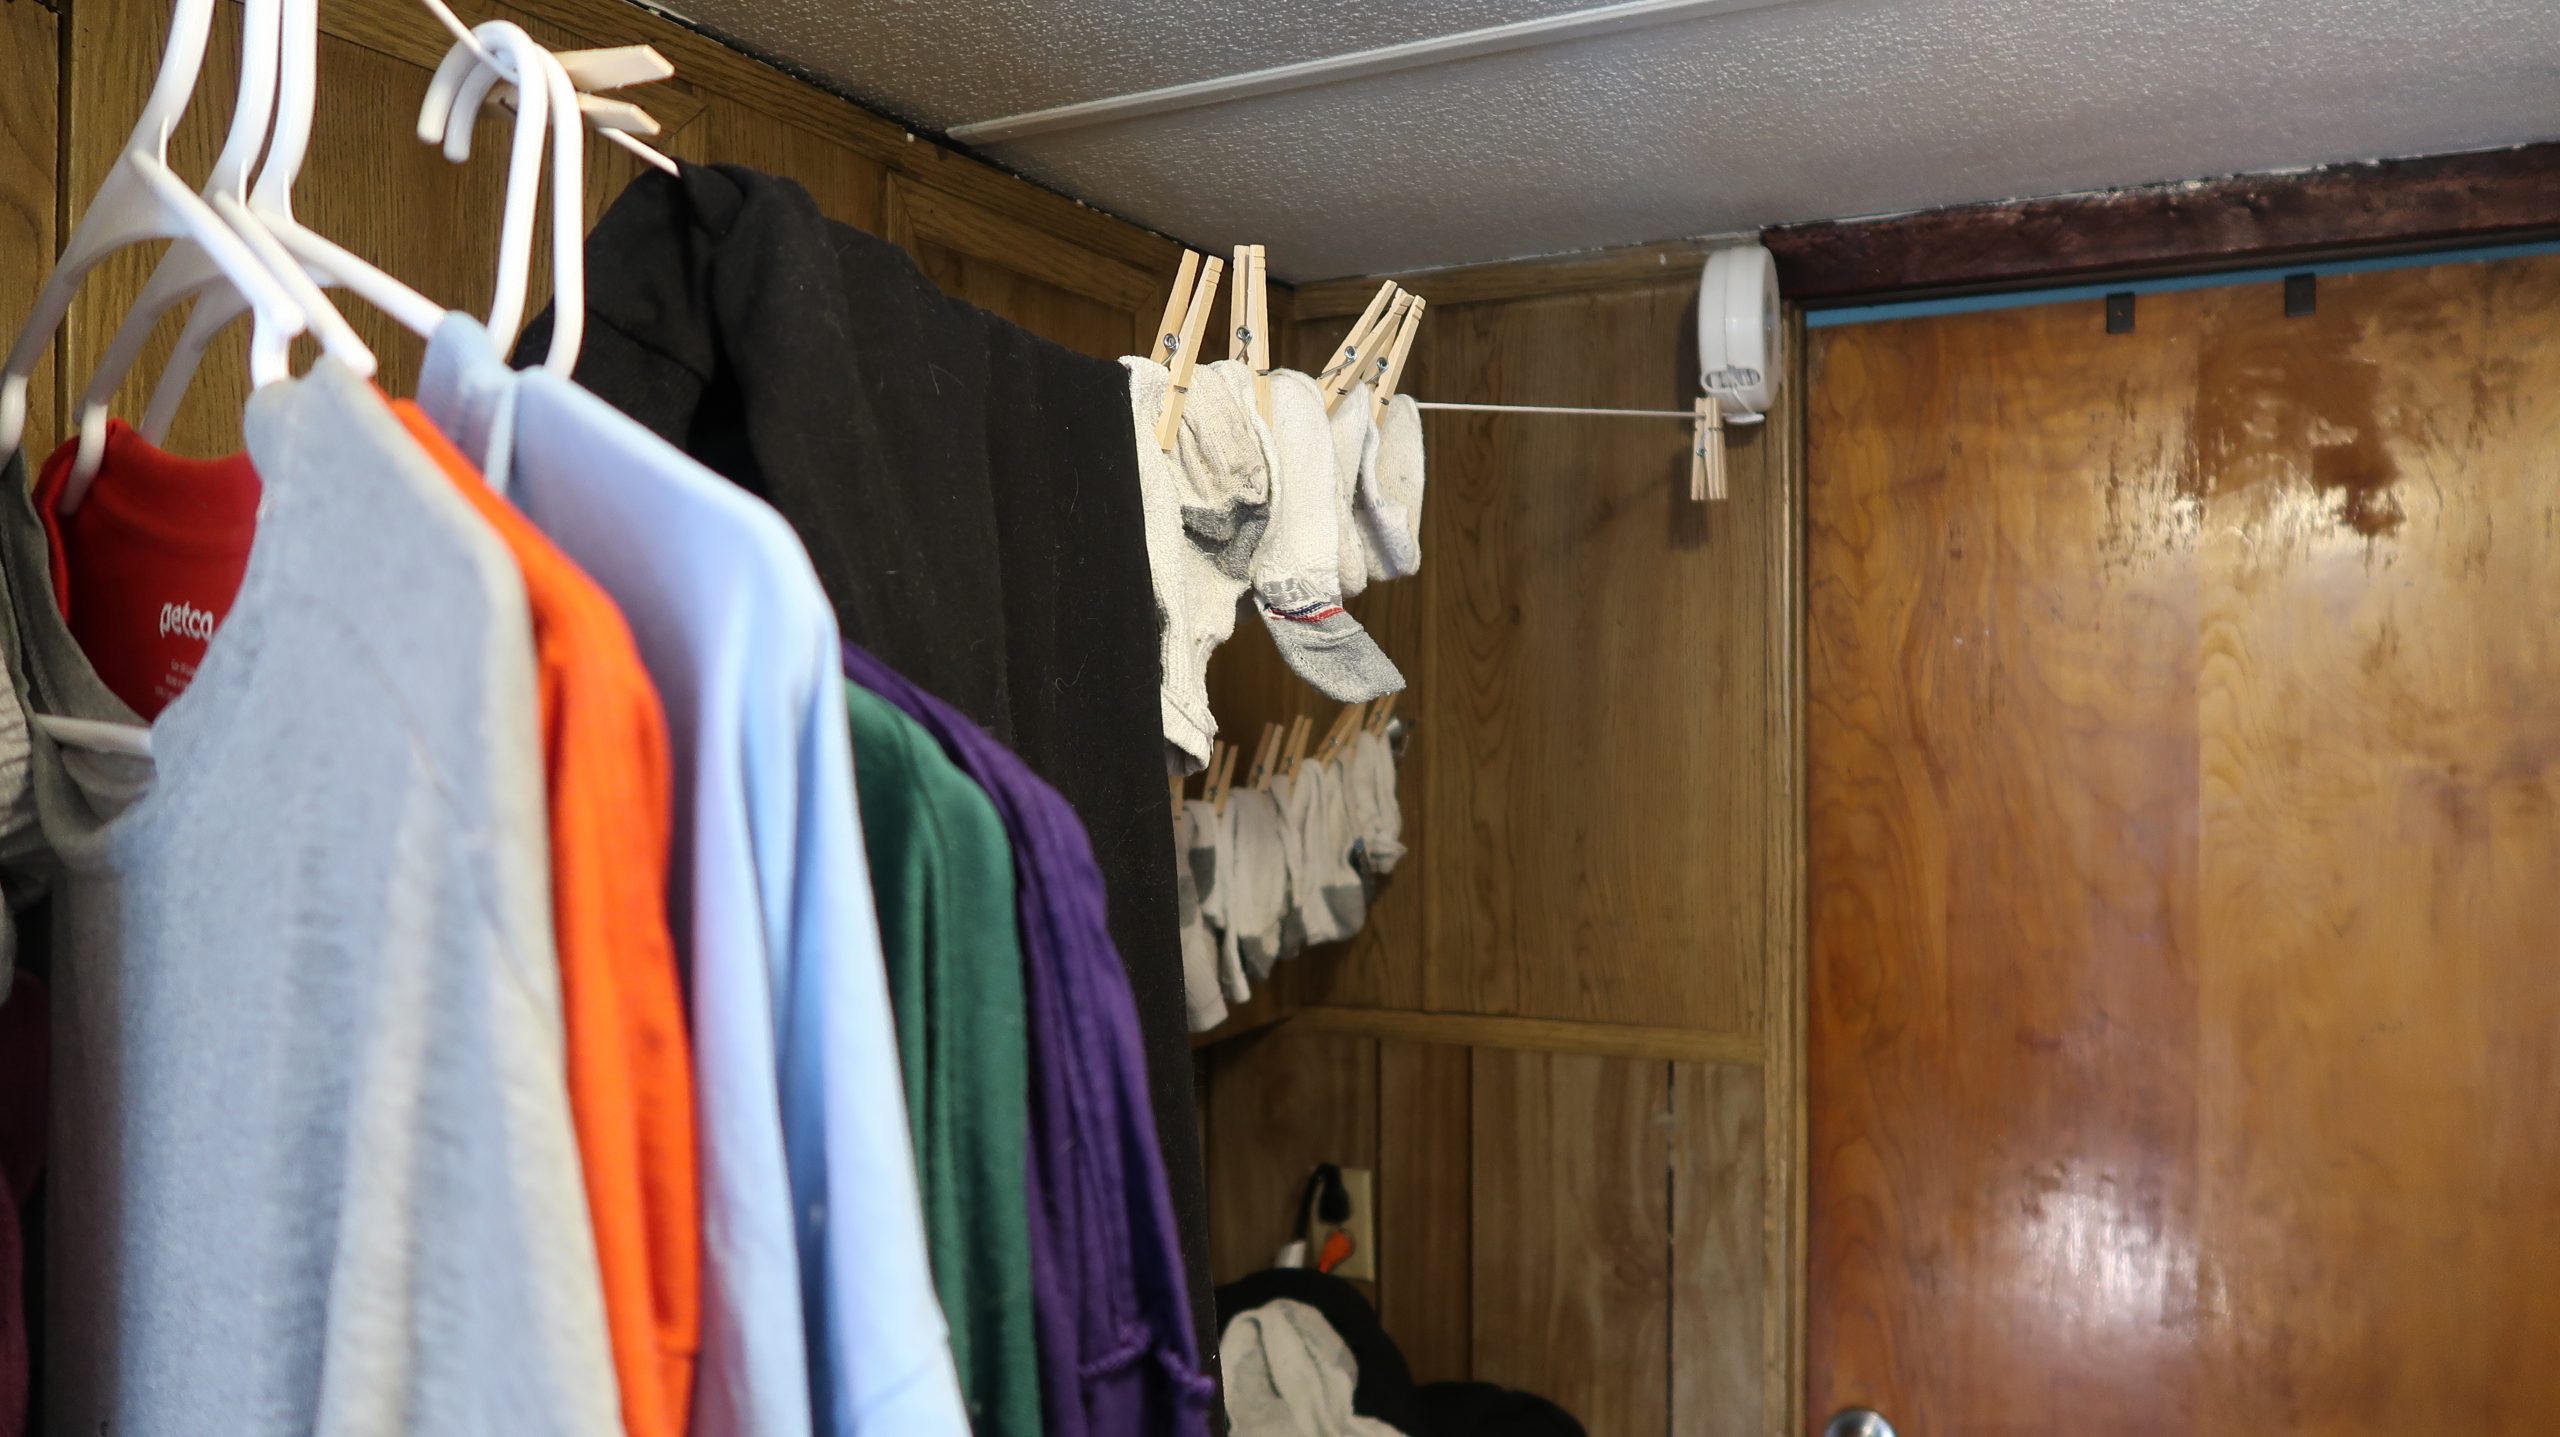 The image is of a clothesline in a small laundry room. Clothes are hanging on the line.